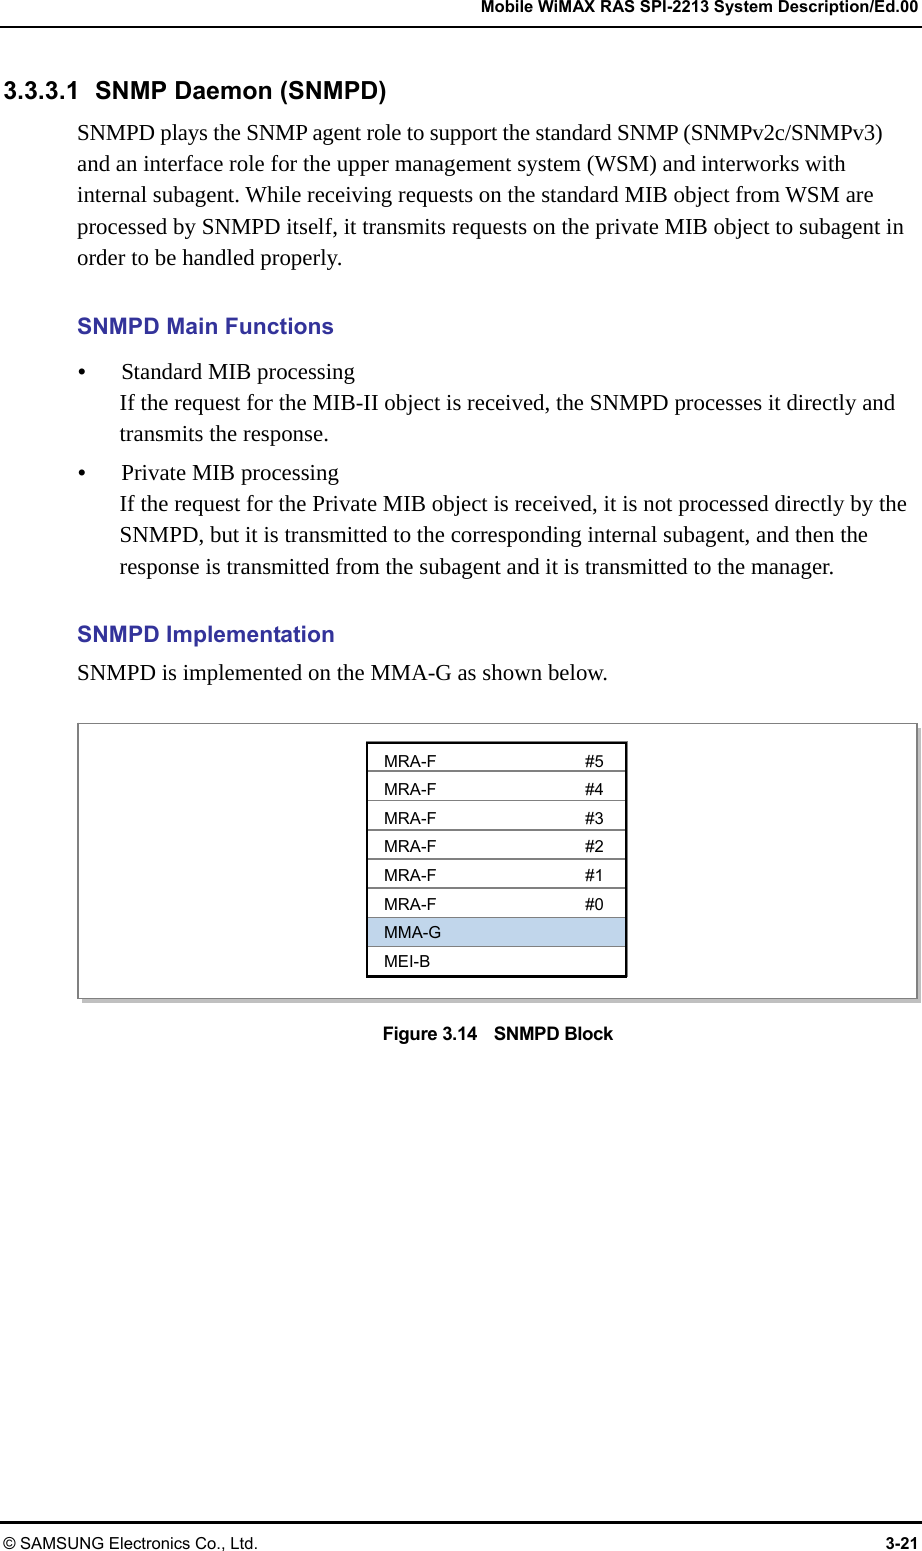   Mobile WiMAX RAS SPI-2213 System Description/Ed.00 © SAMSUNG Electronics Co., Ltd.  3-21 3.3.3.1  SNMP Daemon (SNMPD) SNMPD plays the SNMP agent role to support the standard SNMP (SNMPv2c/SNMPv3) and an interface role for the upper management system (WSM) and interworks with internal subagent. While receiving requests on the standard MIB object from WSM are processed by SNMPD itself, it transmits requests on the private MIB object to subagent in order to be handled properly.  SNMPD Main Functions y Standard MIB processing If the request for the MIB-II object is received, the SNMPD processes it directly and transmits the response. y Private MIB processing If the request for the Private MIB object is received, it is not processed directly by the SNMPD, but it is transmitted to the corresponding internal subagent, and then the response is transmitted from the subagent and it is transmitted to the manager.  SNMPD Implementation SNMPD is implemented on the MMA-G as shown below.  Figure 3.14    SNMPD Block  MRA-F #5 MRA-F #4 MRA-F #3 MRA-F #2 MRA-F #1 MRA-F #0 MMA-G MEI-B 